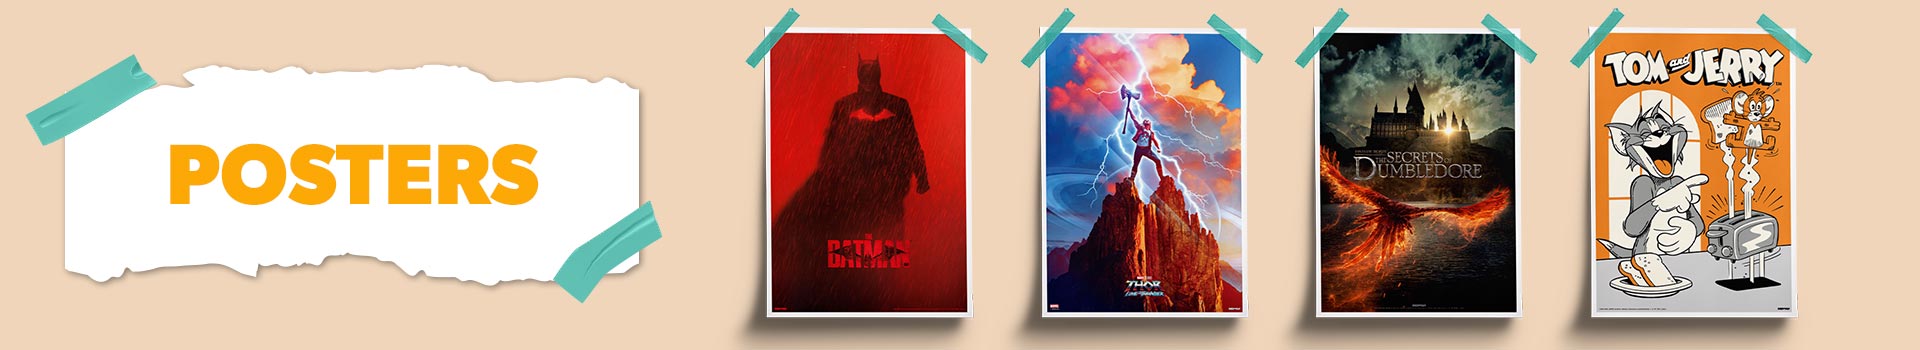 Category Banner - Posters